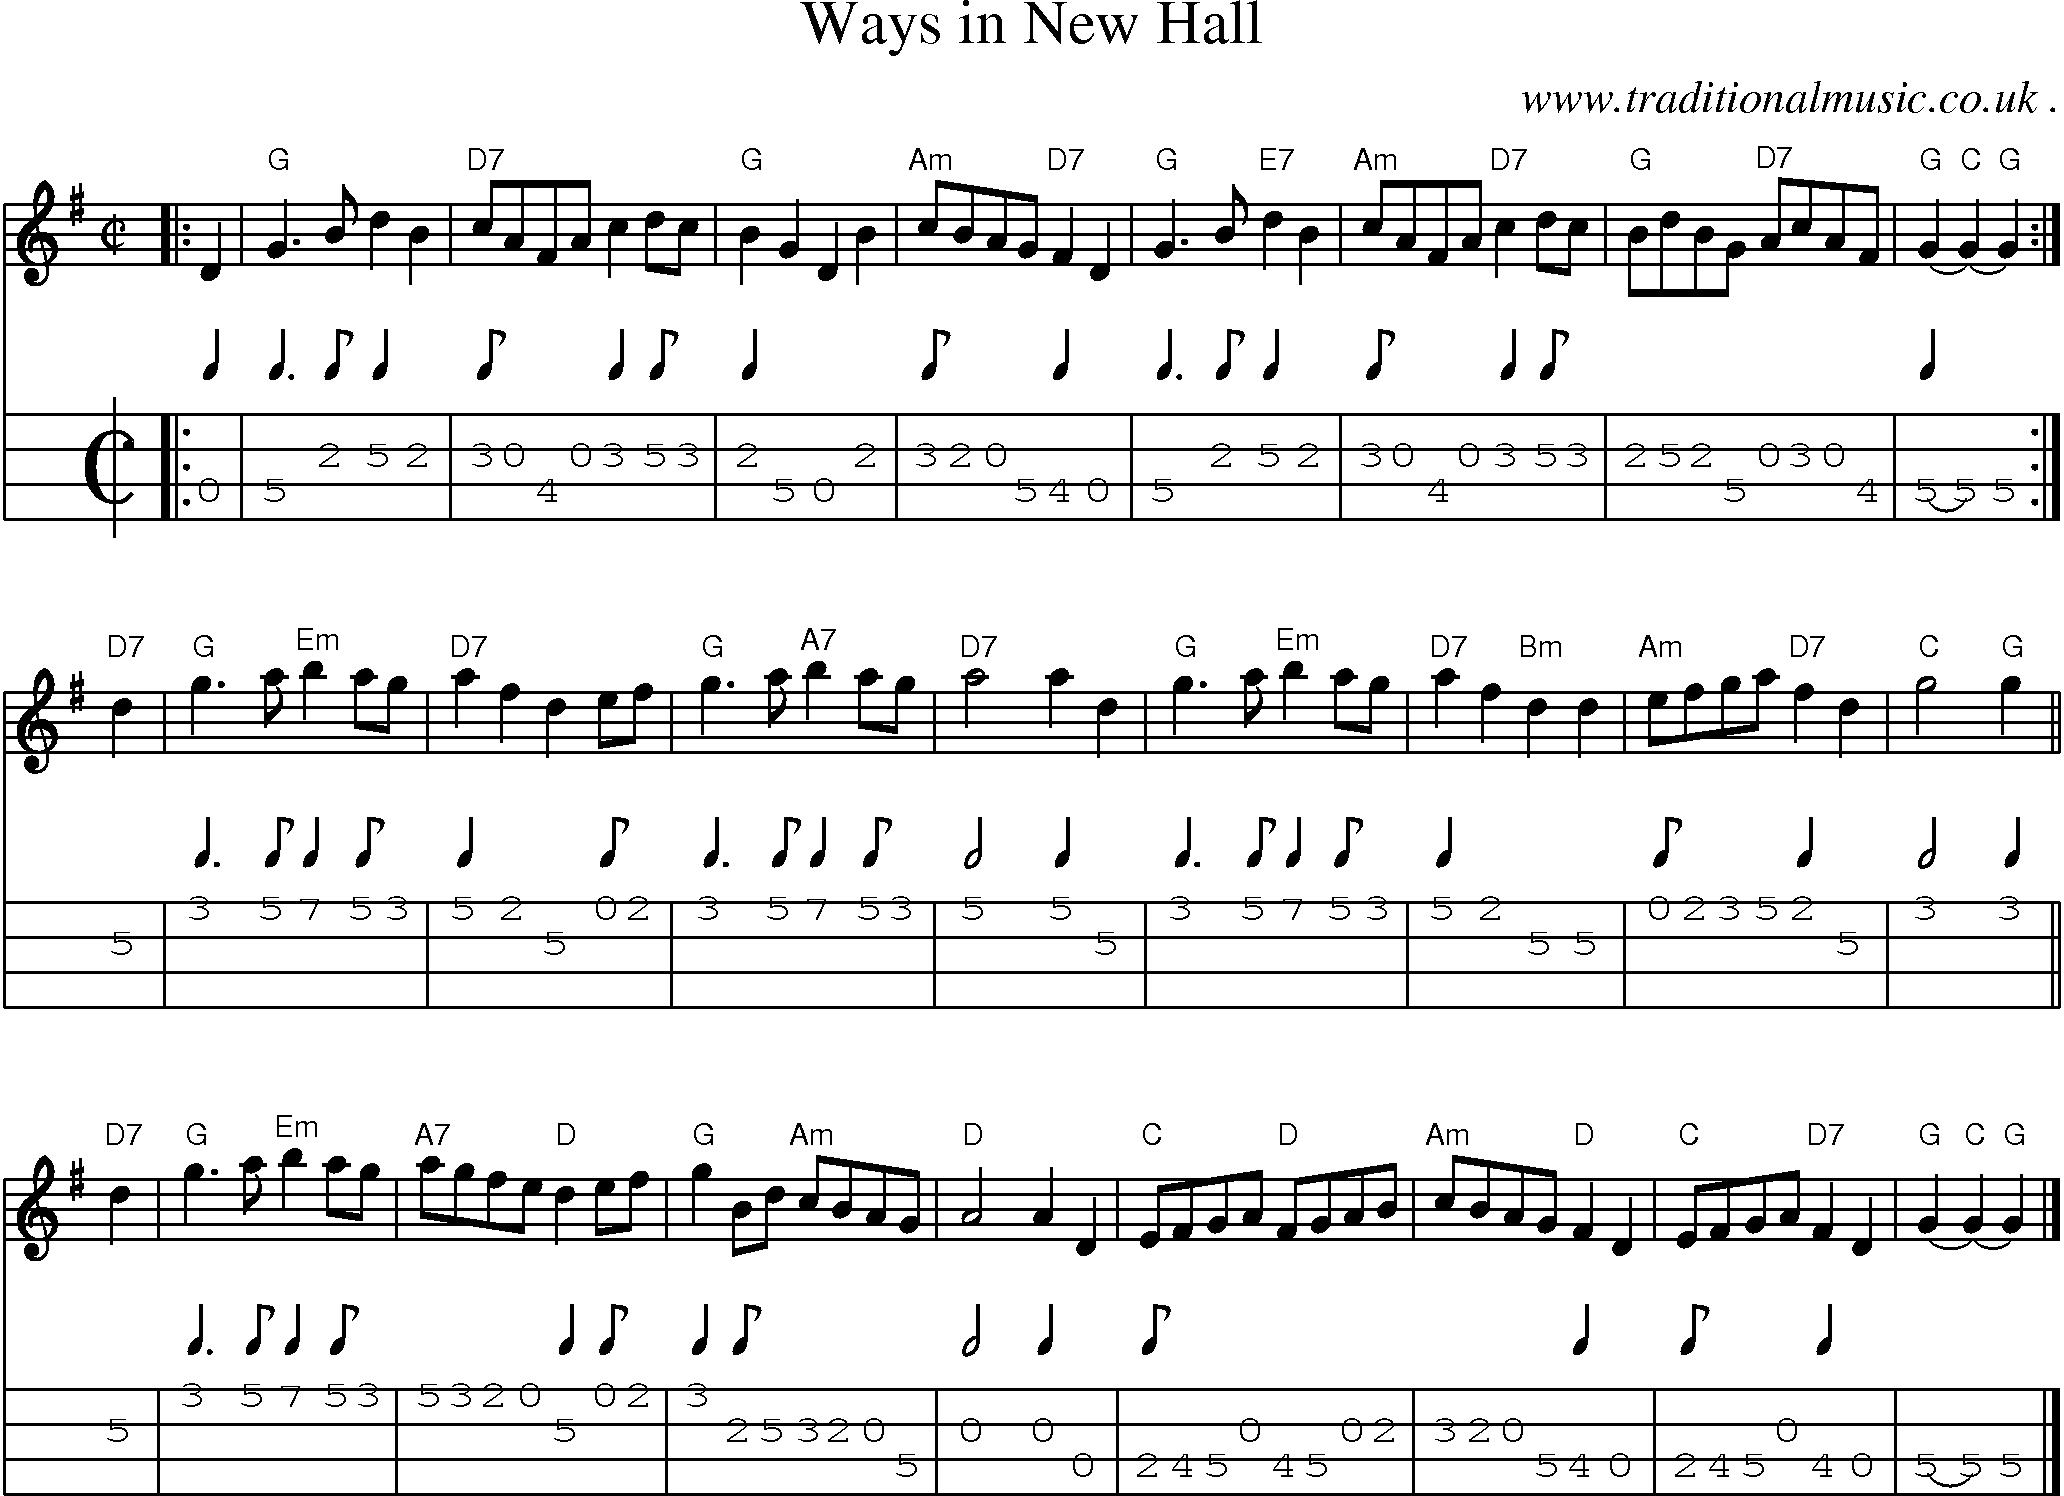 Sheet-music  score, Chords and Mandolin Tabs for Ways In New Hall